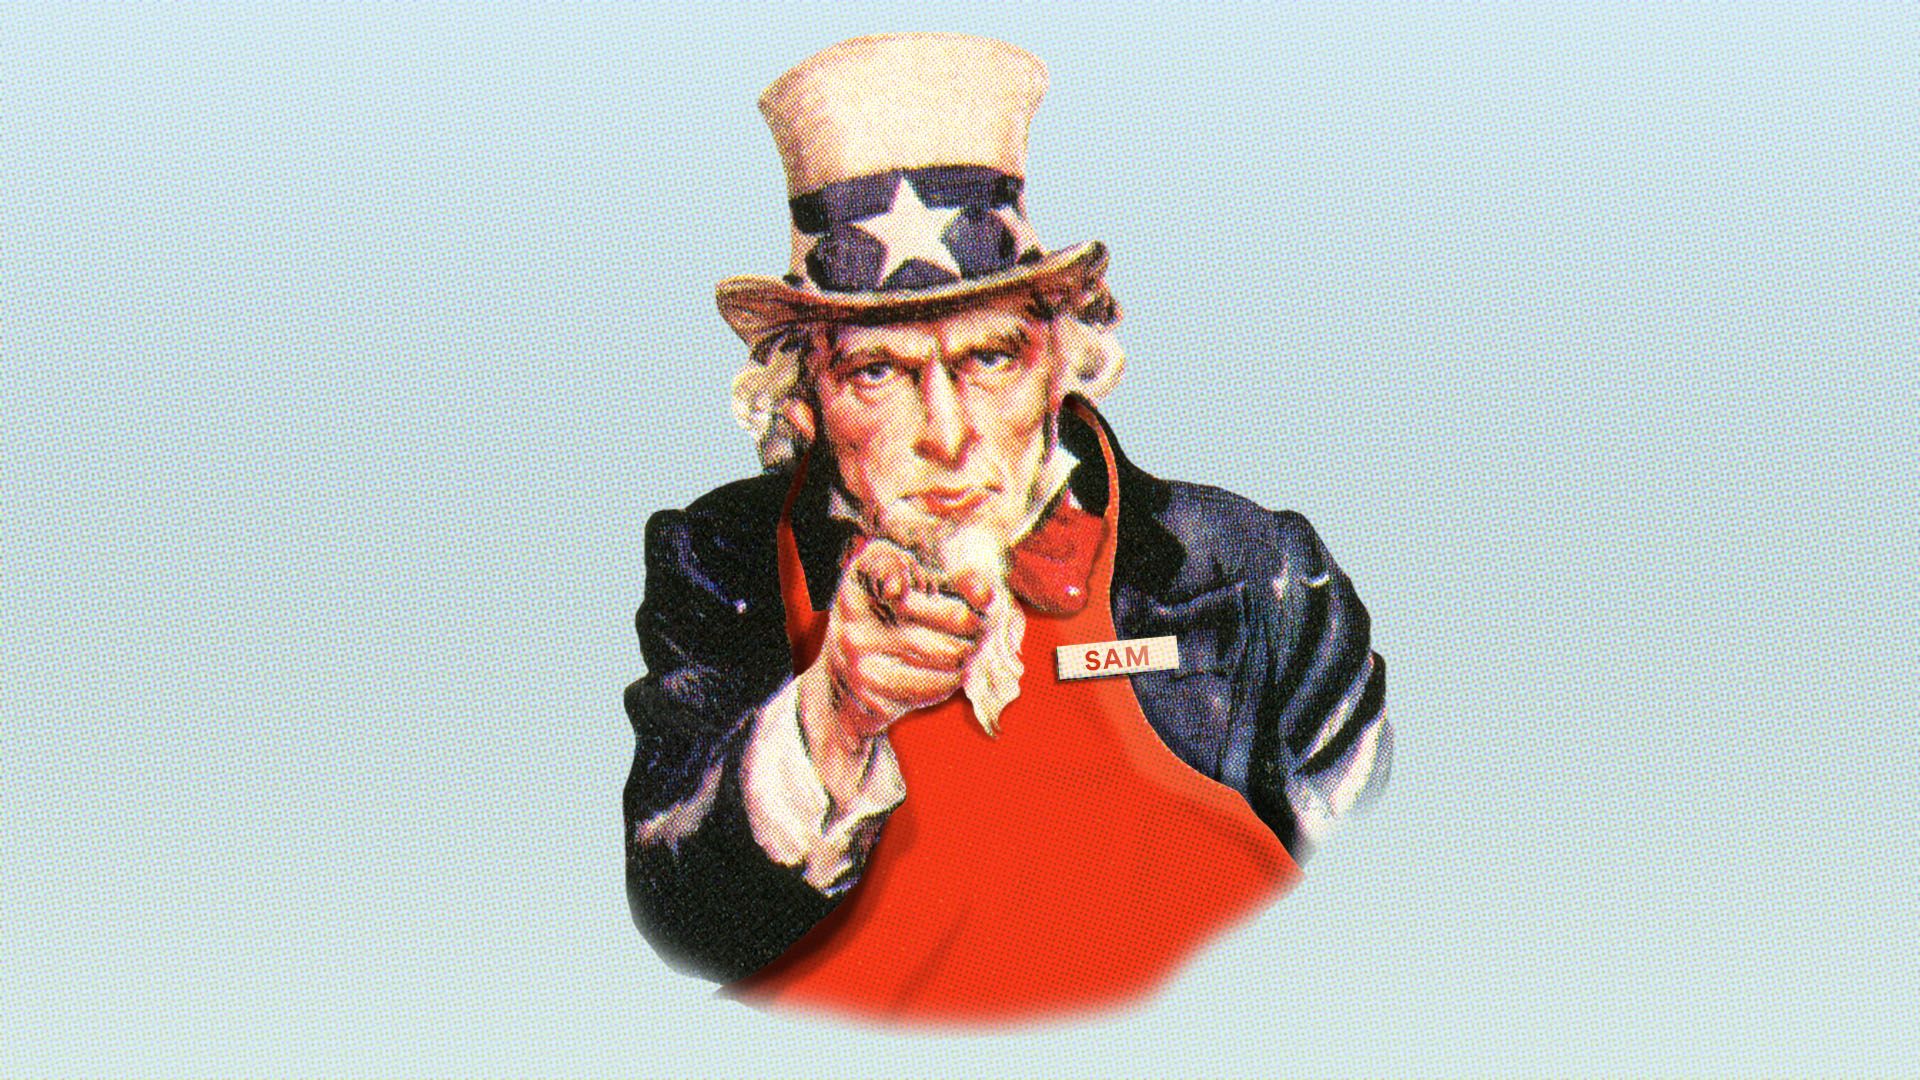 Illustration of Uncle Sam wearing an apron and name tag